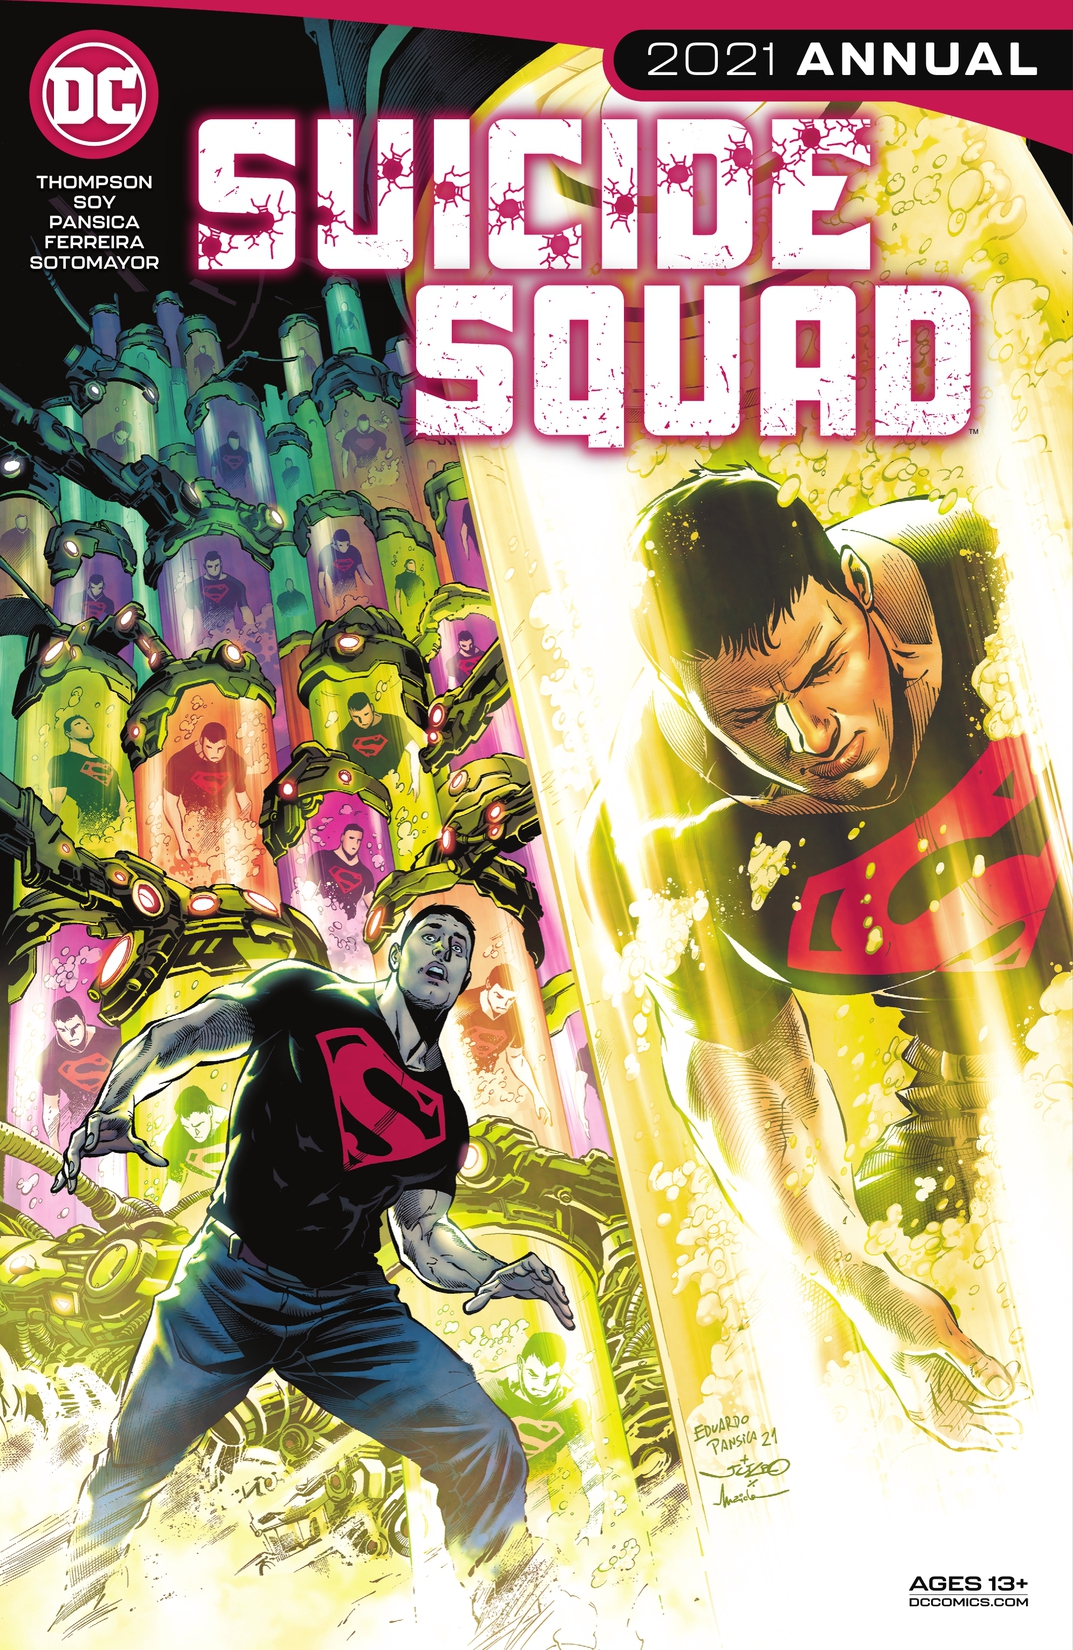 Suicide Squad 2021 Annual #1 preview images